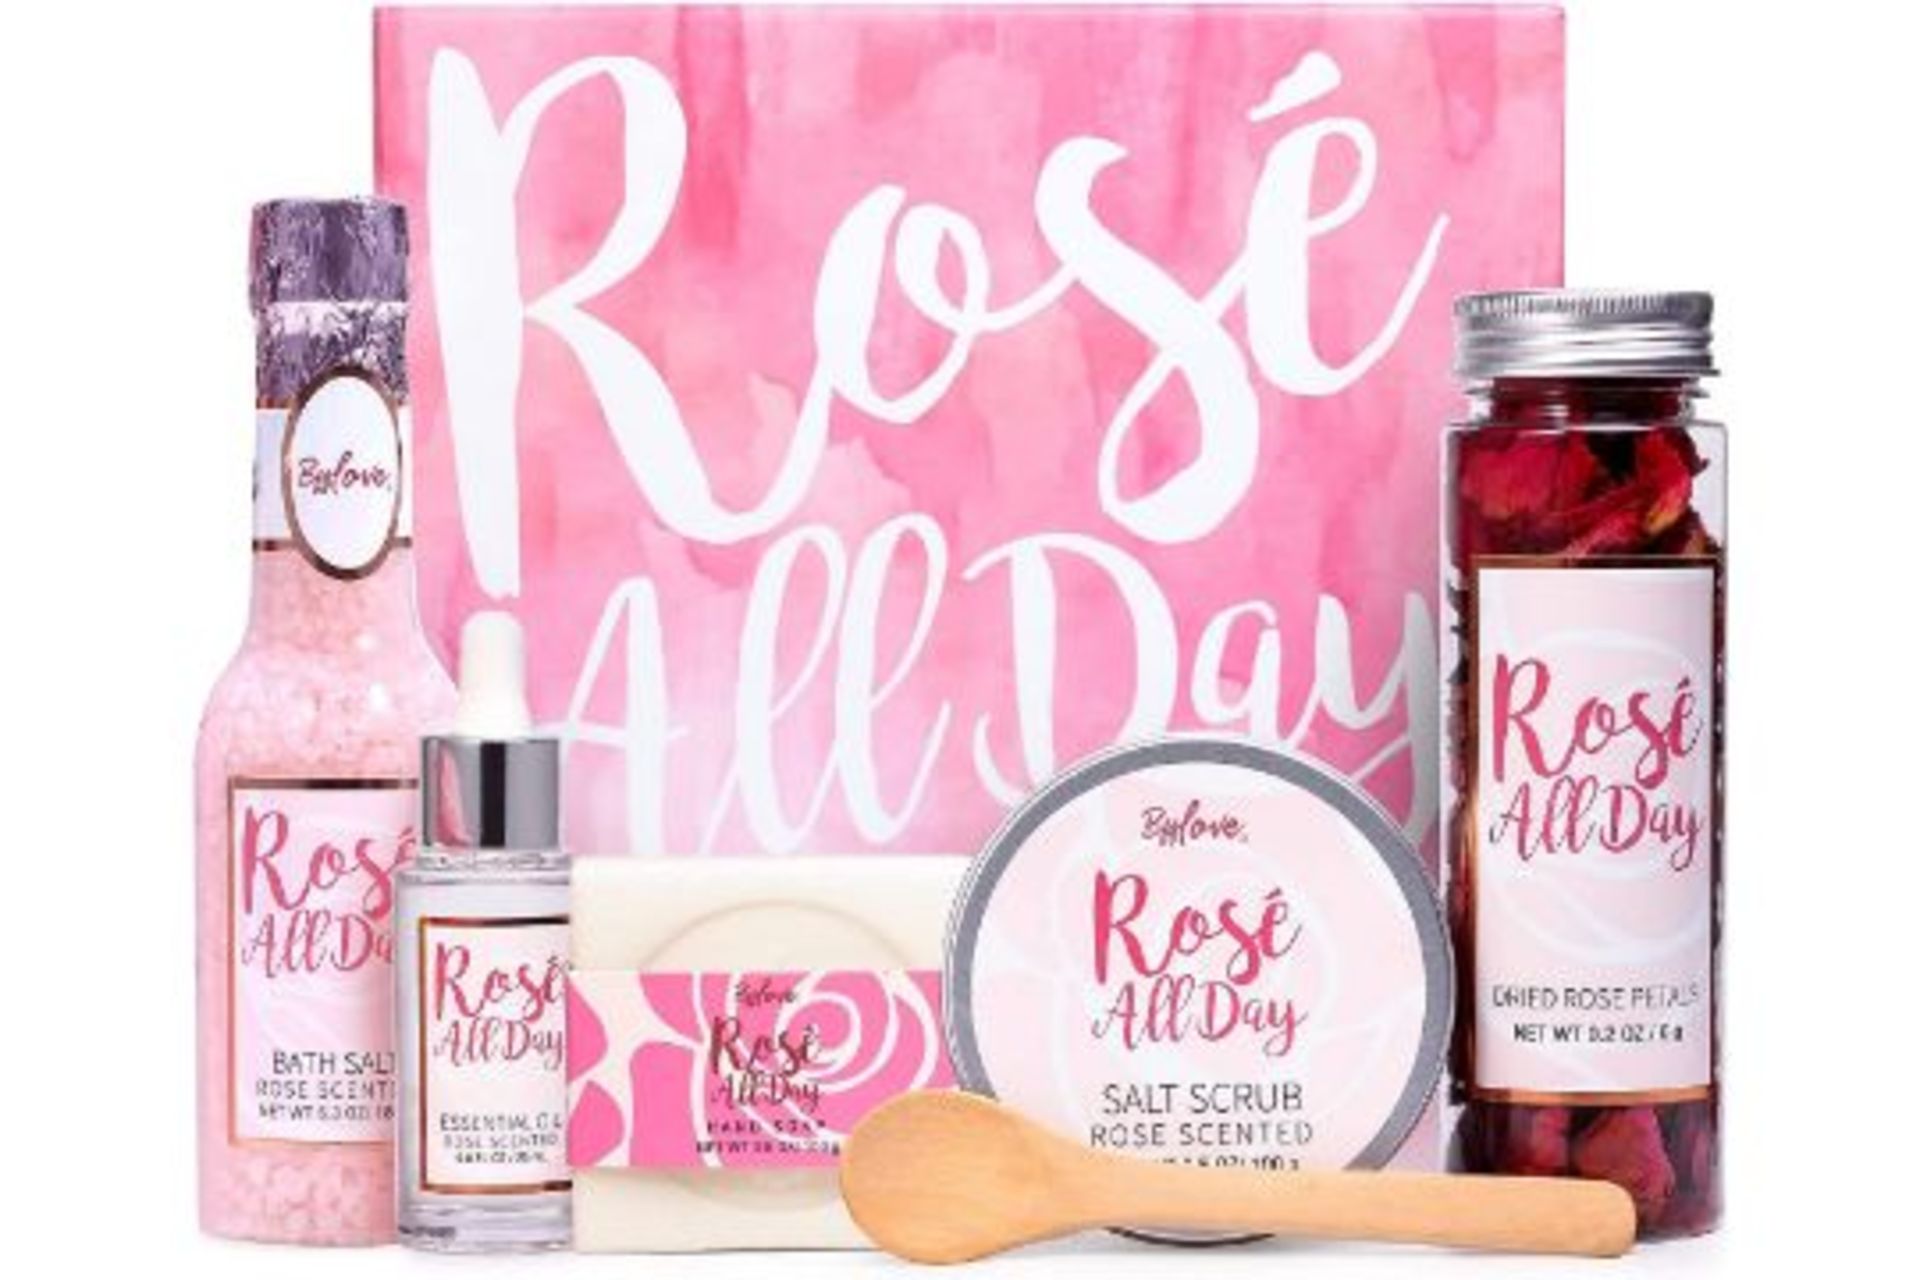 6 X NEW PACKAGED Rose All Day Bath Gift Box. (SKU:BFF-BP-11) Best Gift Set for Women - Our spa